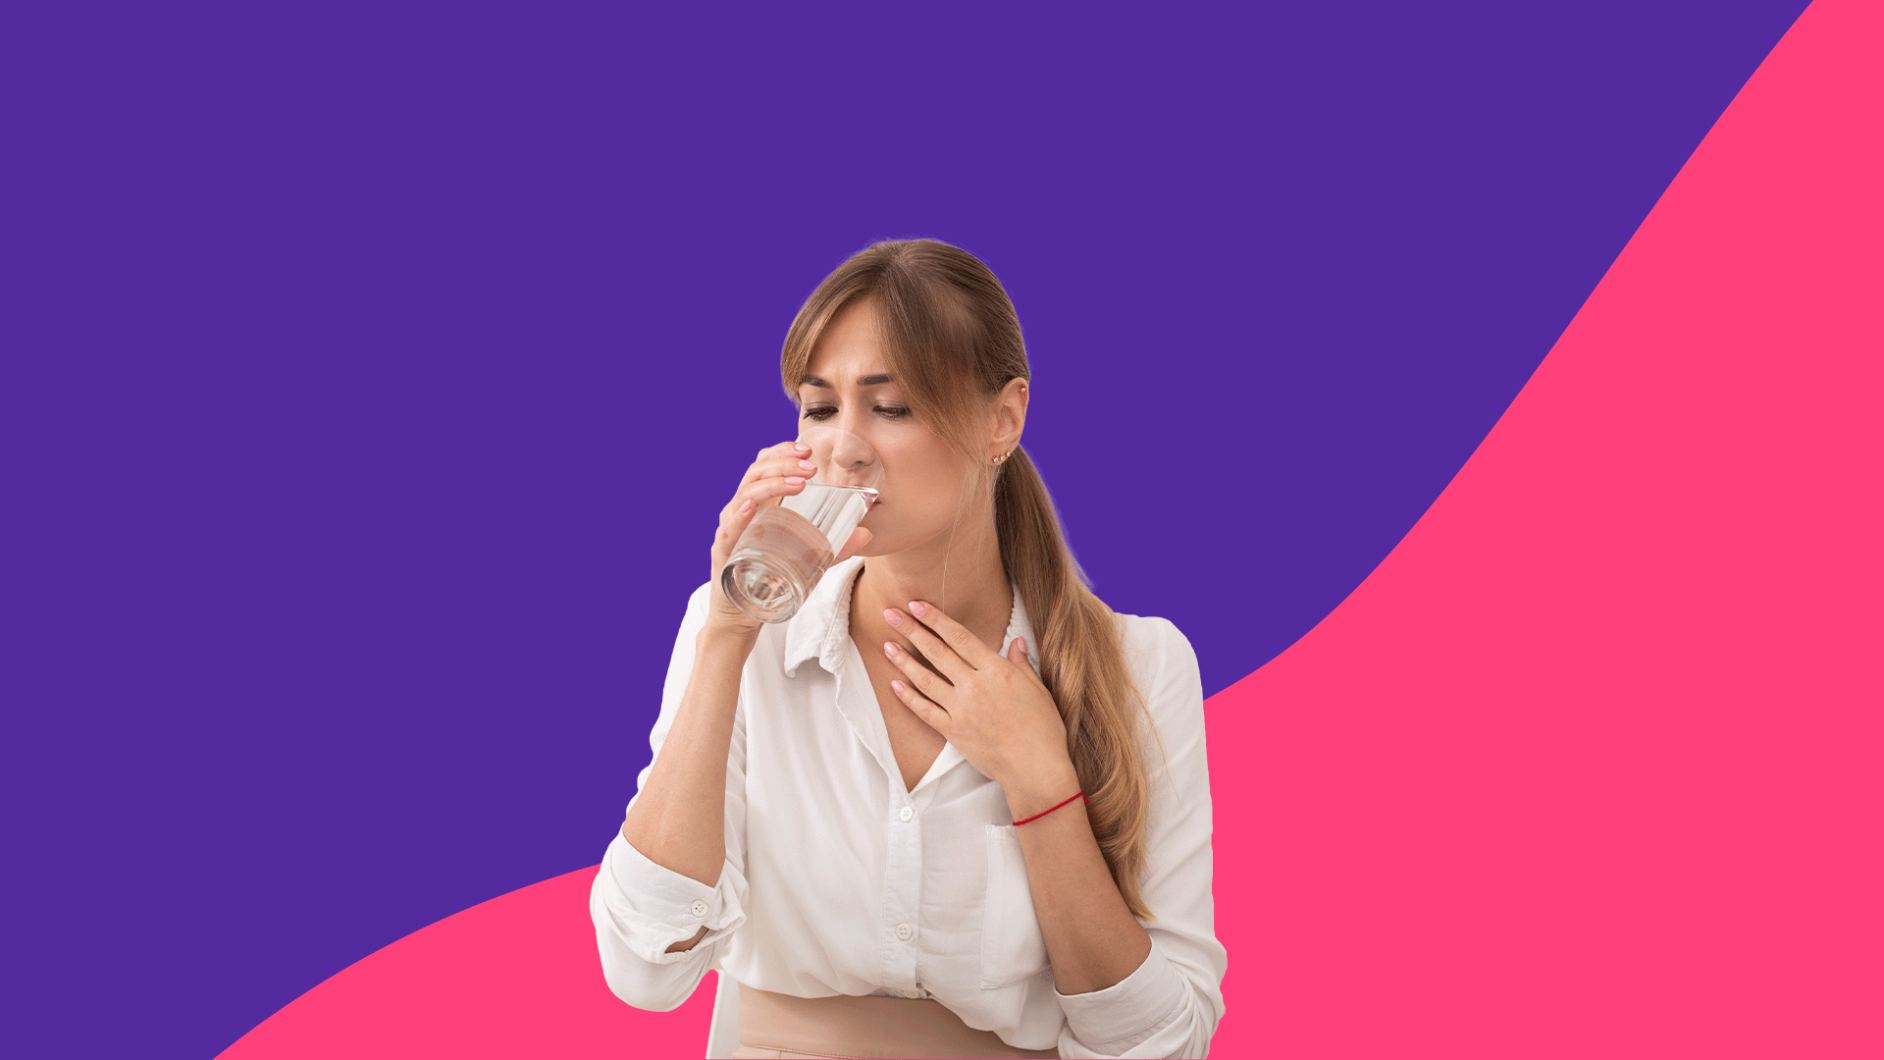 Woman drinking water and touching throat: Strep throat remedies